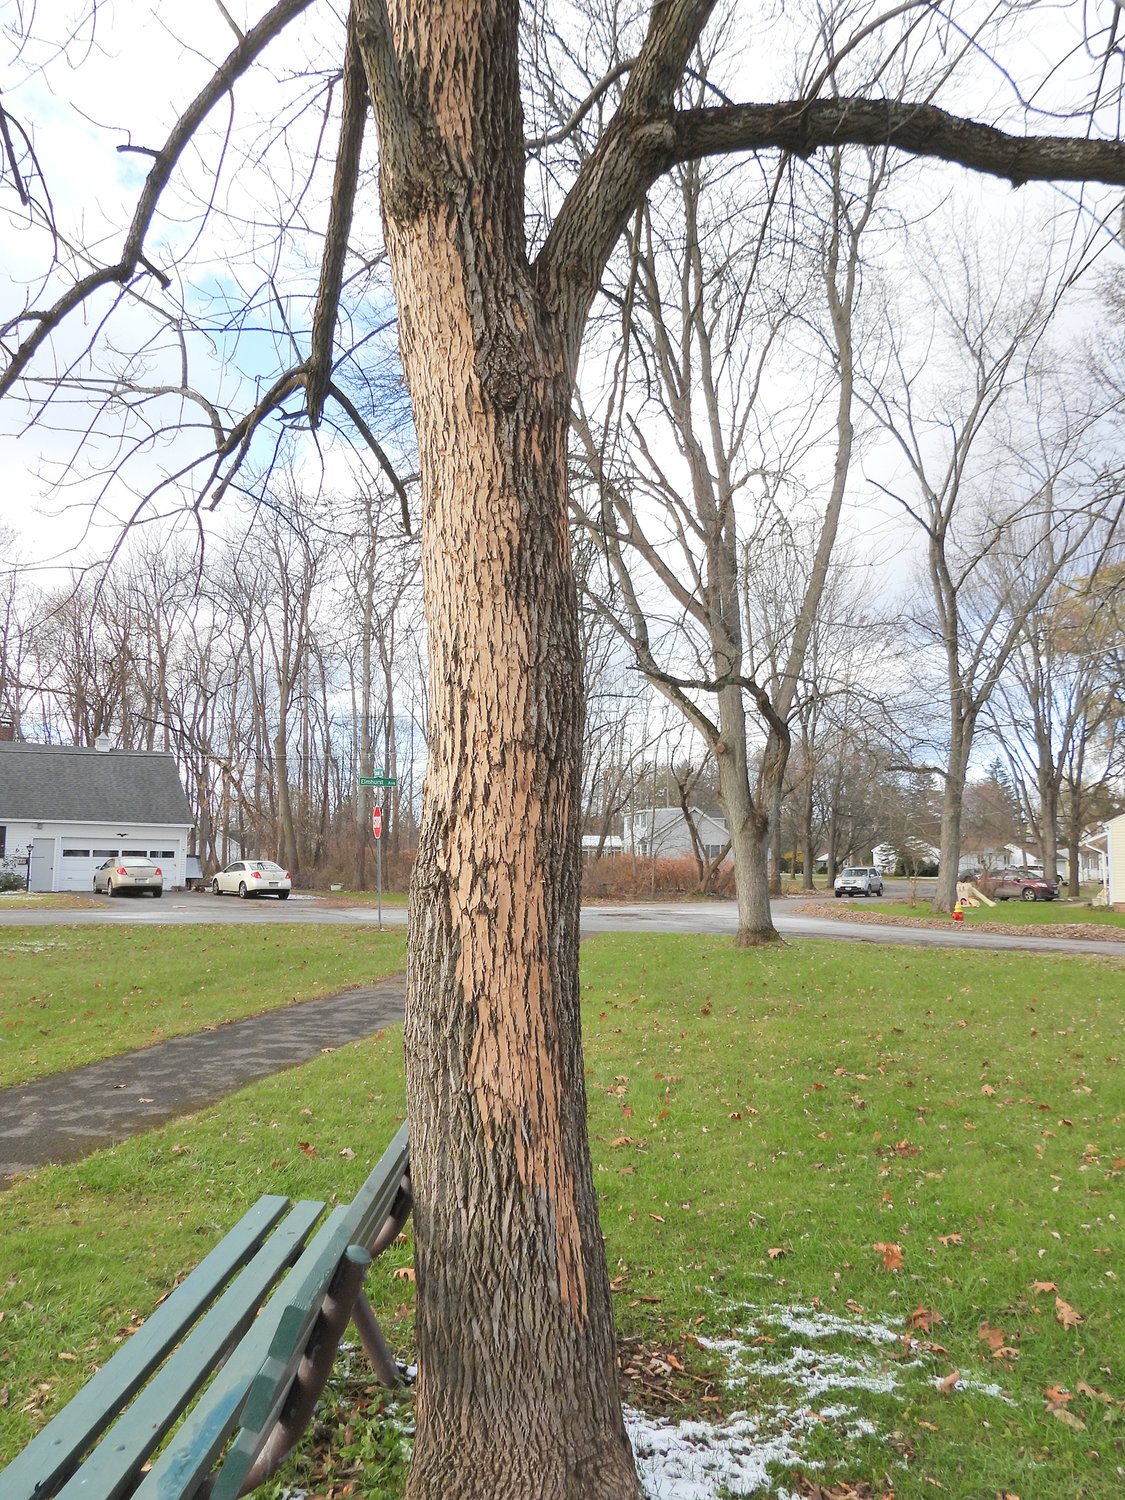 QUICKLY KILLED — Large sections of bark on this ash tree in Lincoln Park is dead and rotting due to the emerald ash borer, an invasive species of beetle. This tree, like others in the park, were just fine a year ago but were killed by the ash borers this past April.